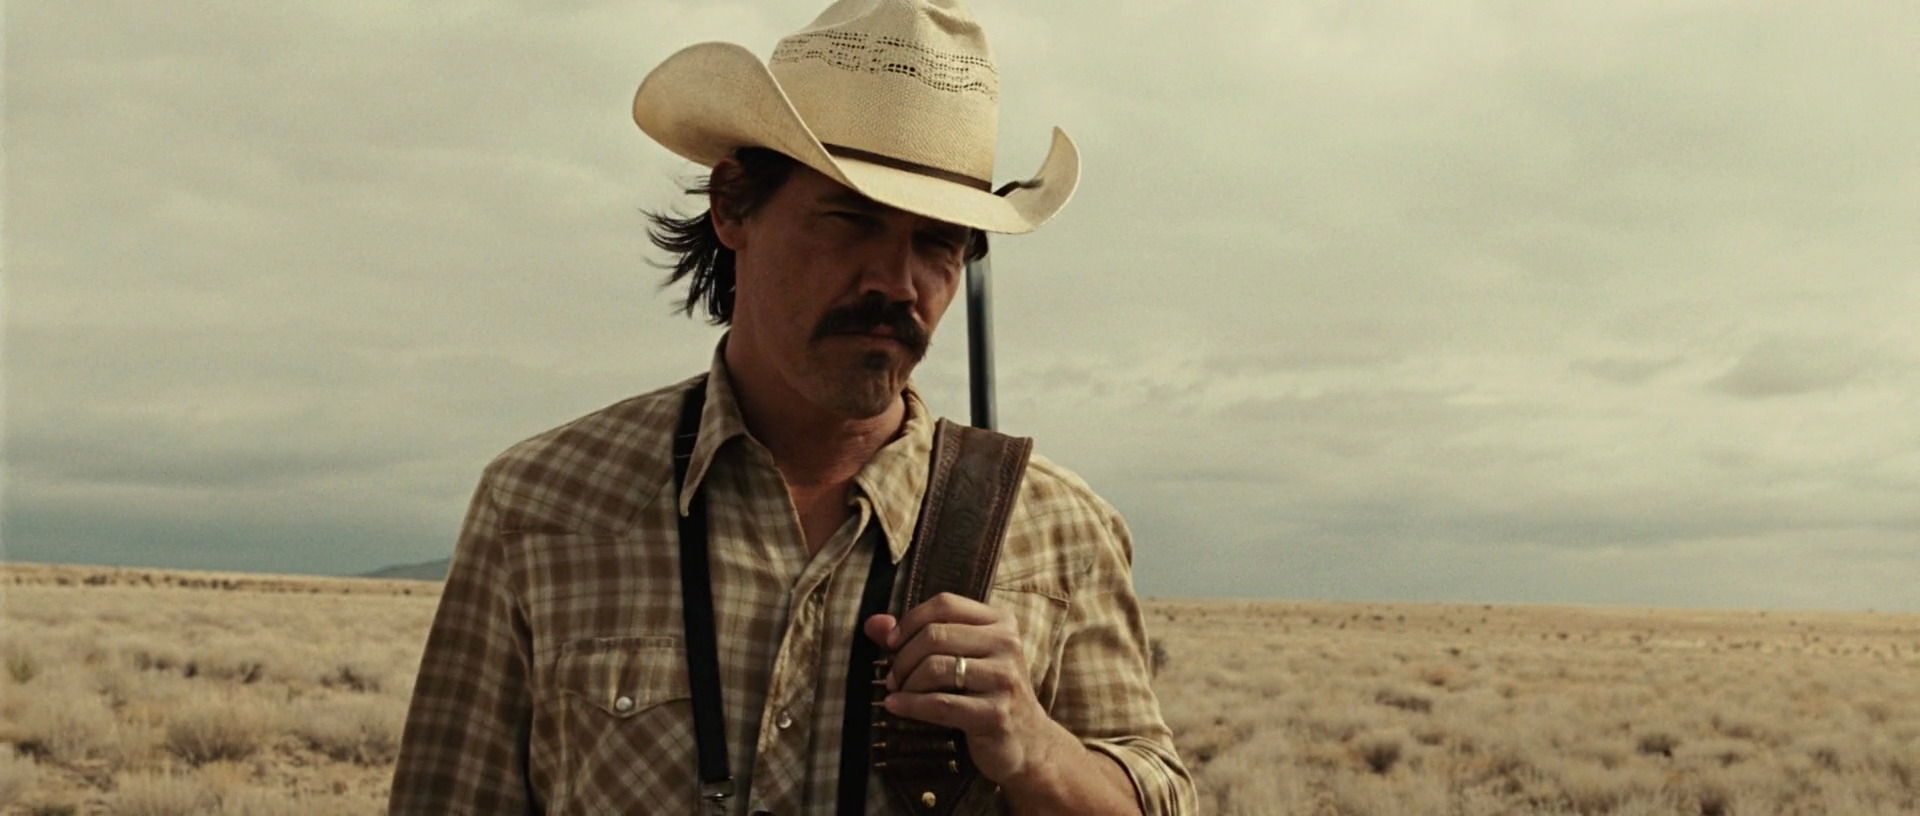 The No Country For Old Men Ending, 10 Years Later